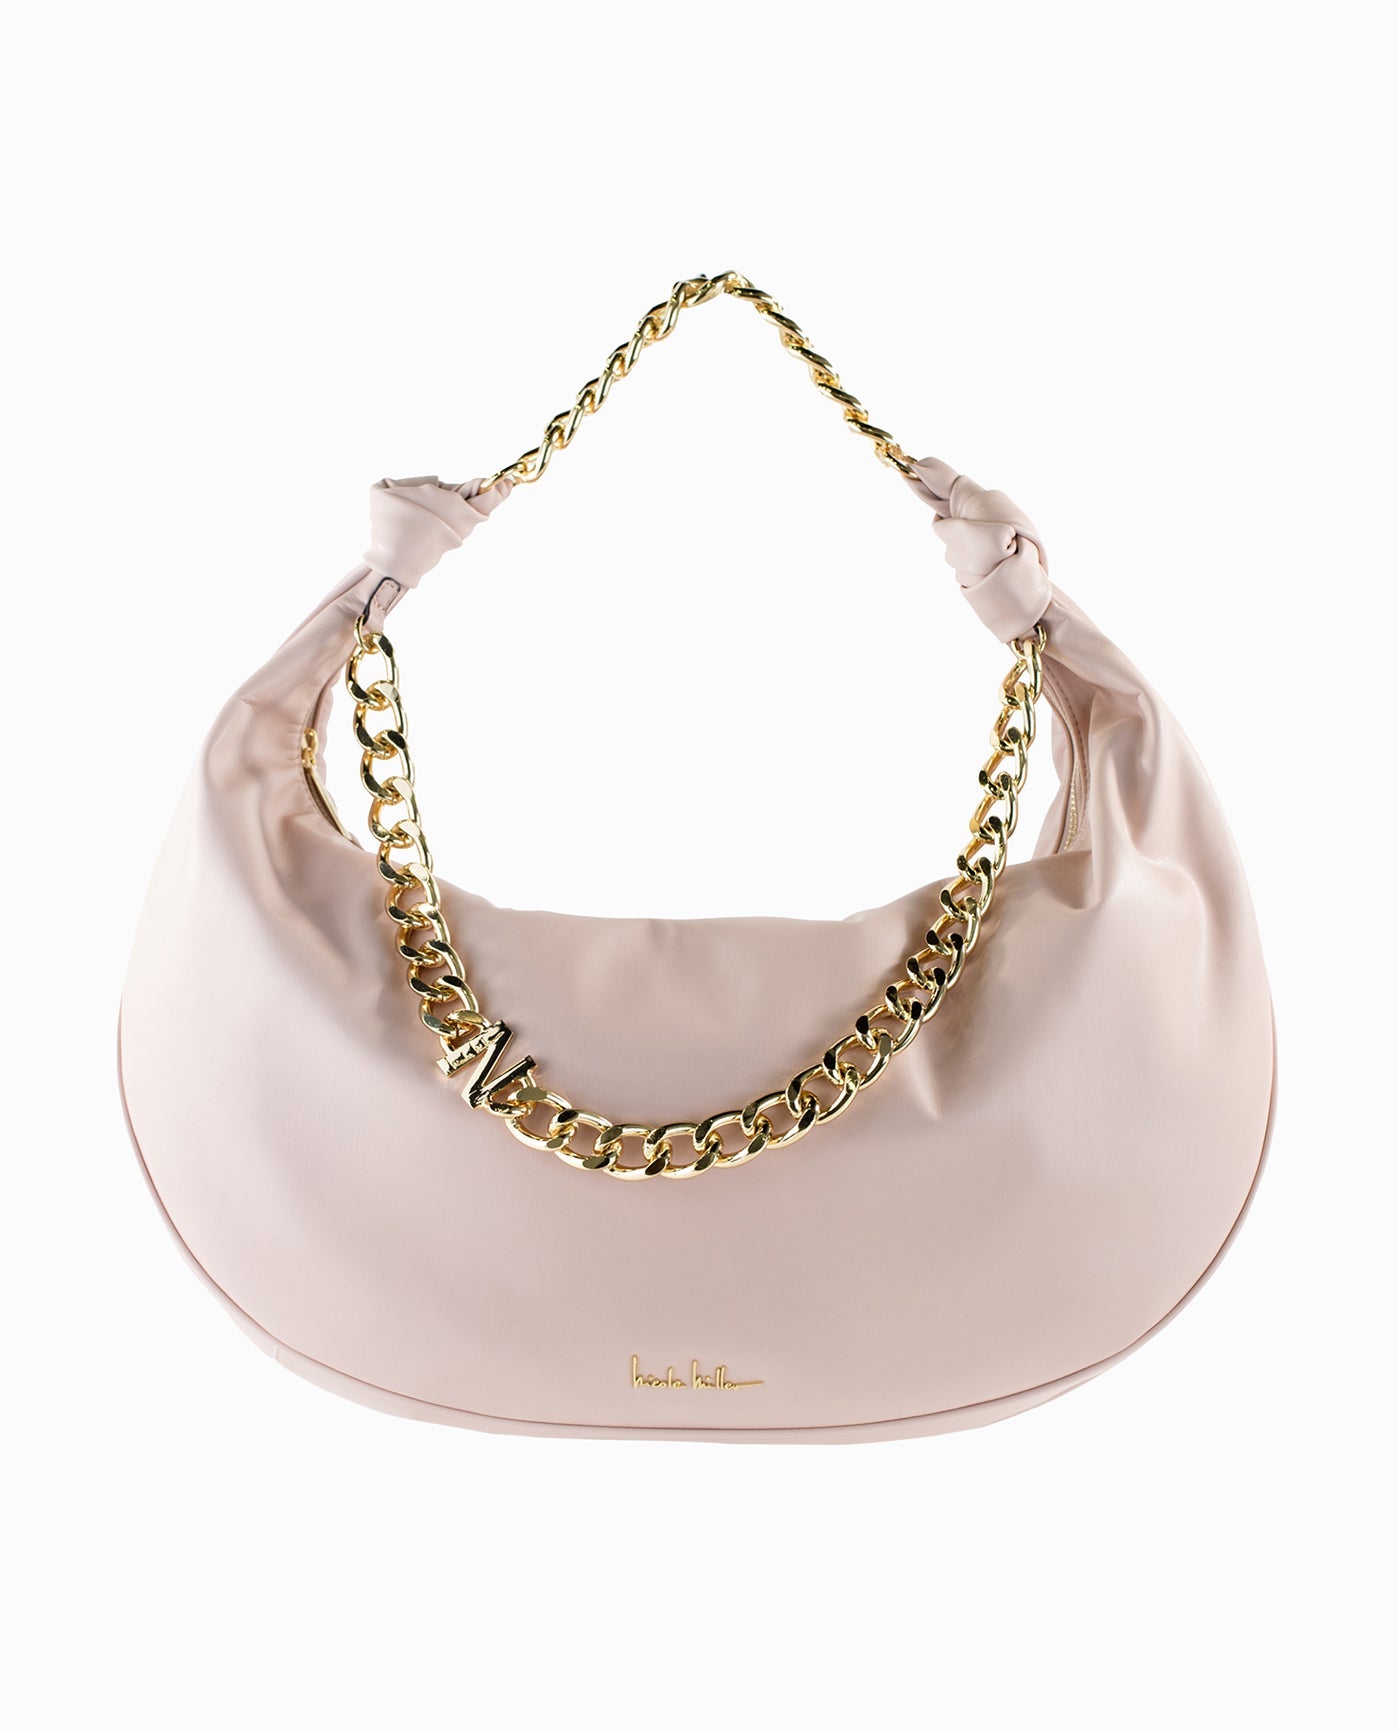 Light Pink Hobo Style Leather Handbag with a Gold Chain, "N" charm and Knot Details | Rose Smoke